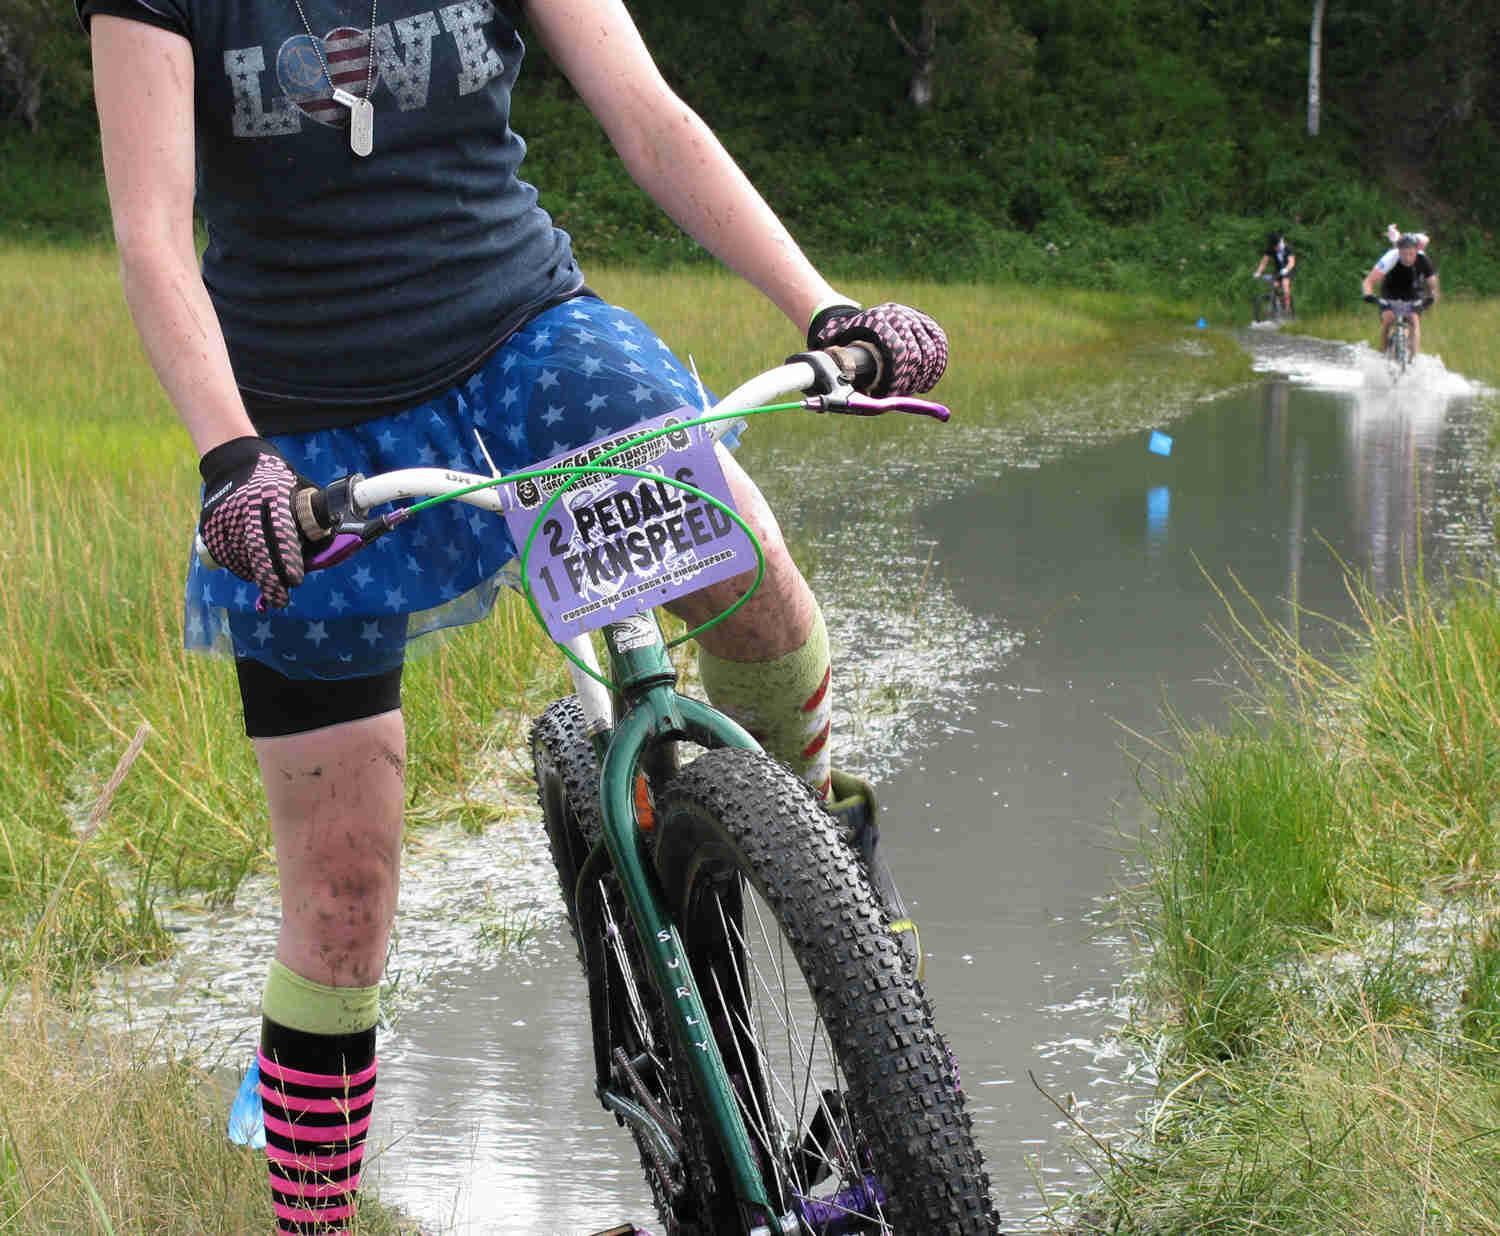 Front view of a cyclist, standing over a green Surly Krampus bike, in a flooded grass field with trees in the background